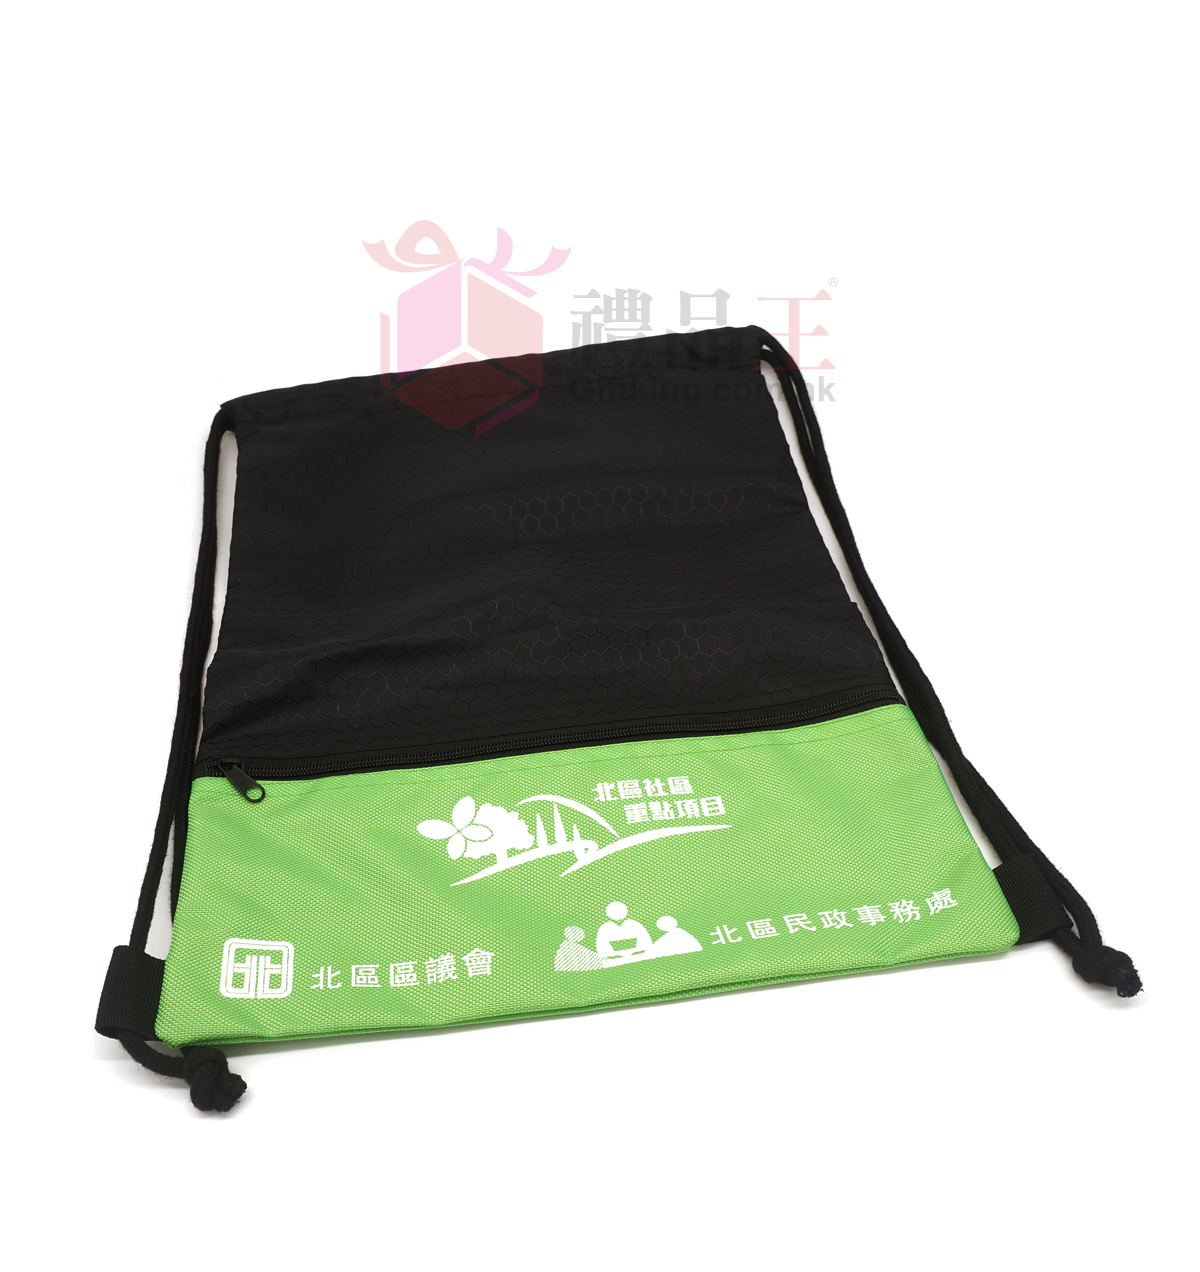 North District Community Key Project Rope Bag ( Clothing Gift)